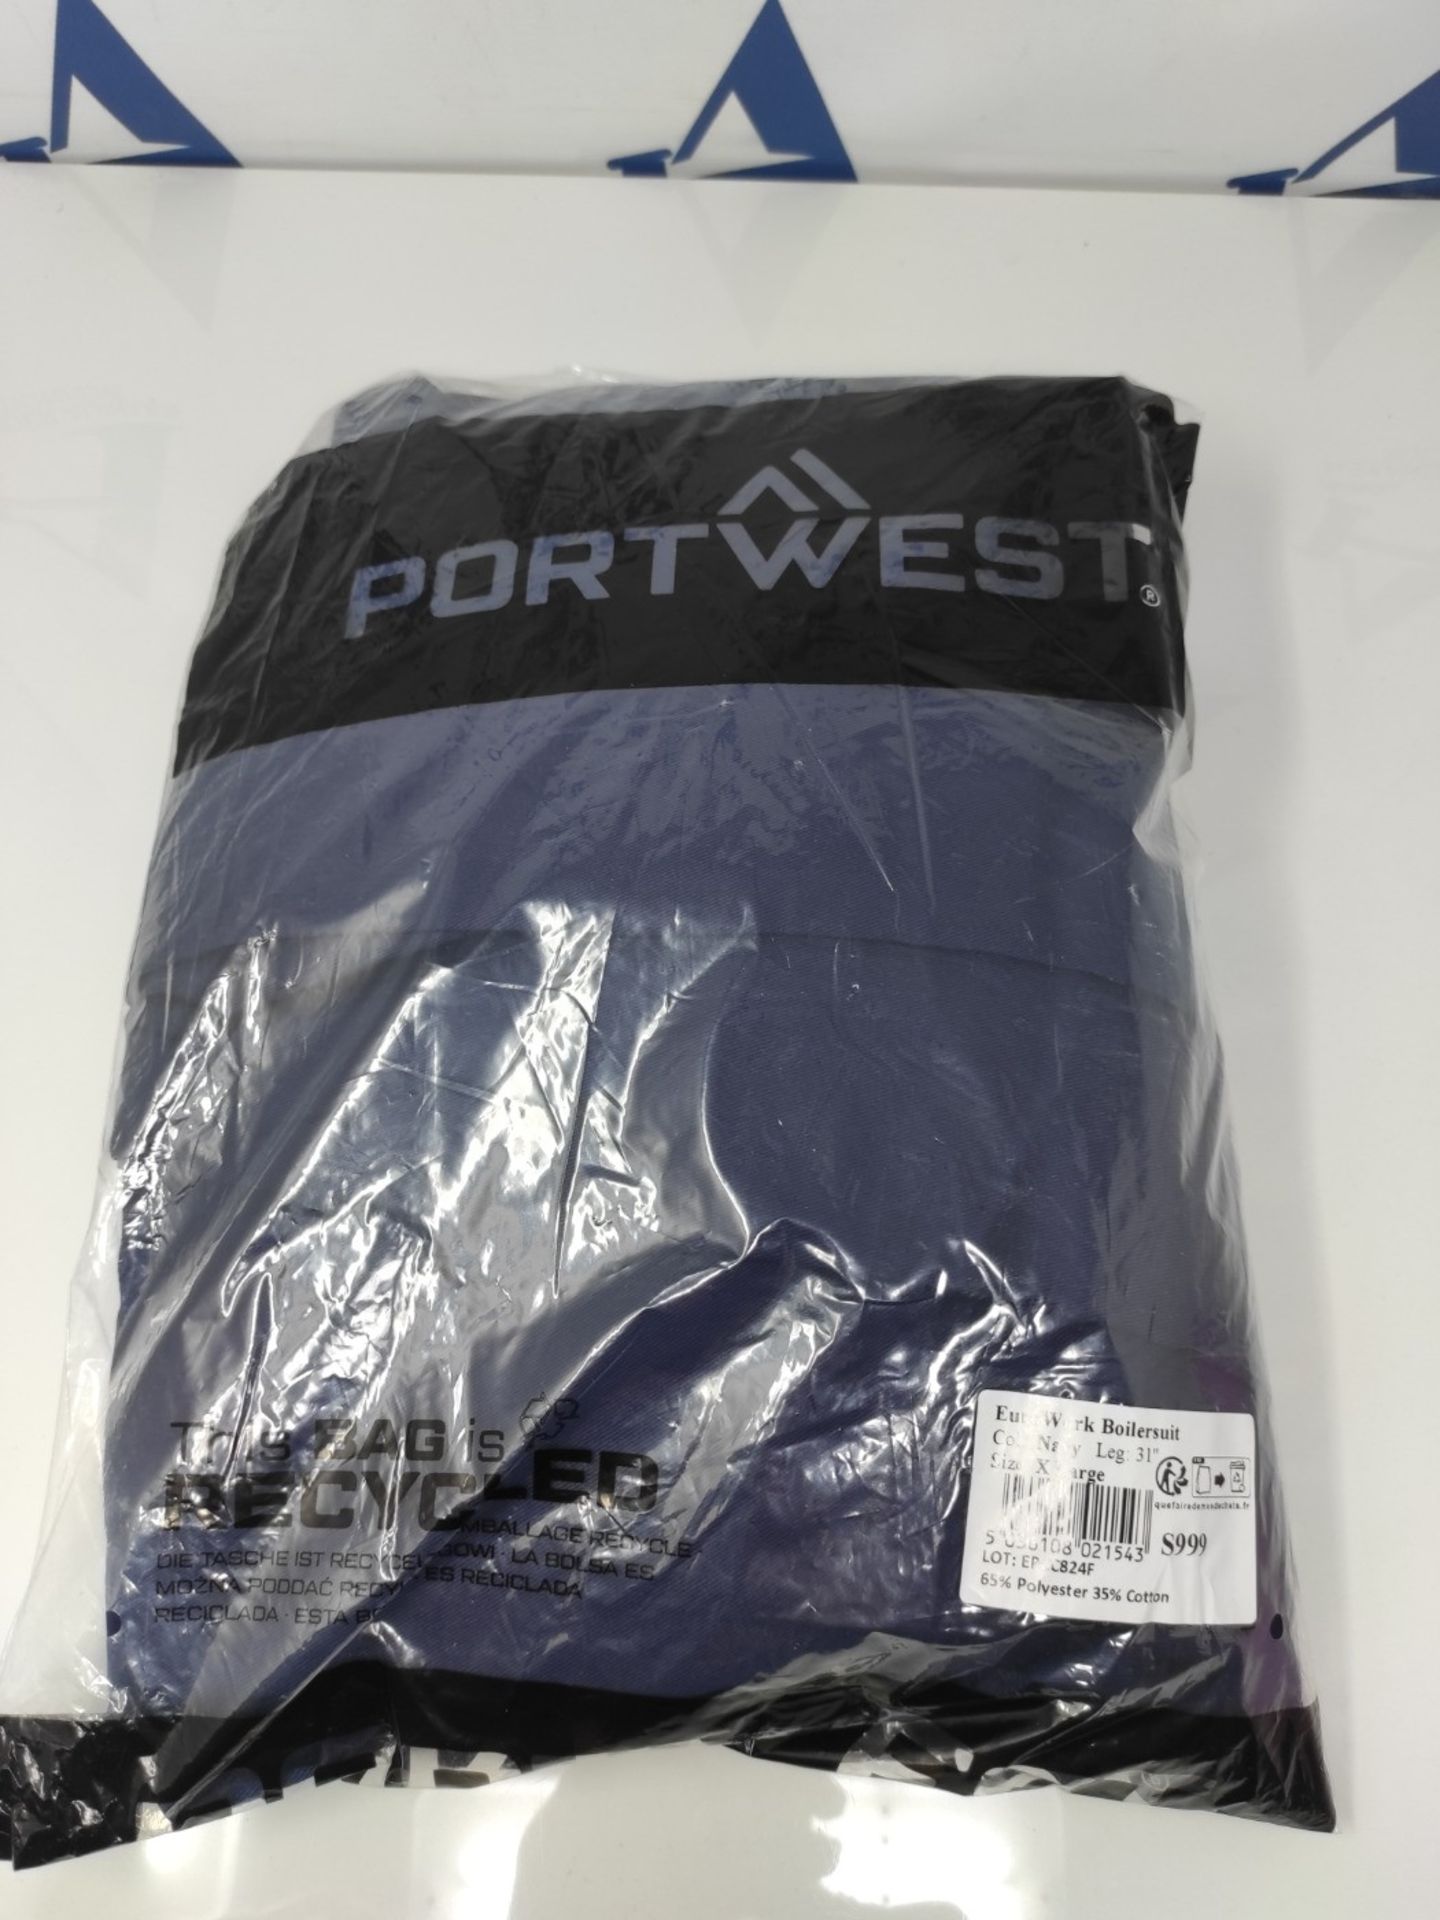 Portwest S999 Men's Euro Workwear Polycotton Coverall Boiler Suit Overalls Navy, XL - Image 2 of 3